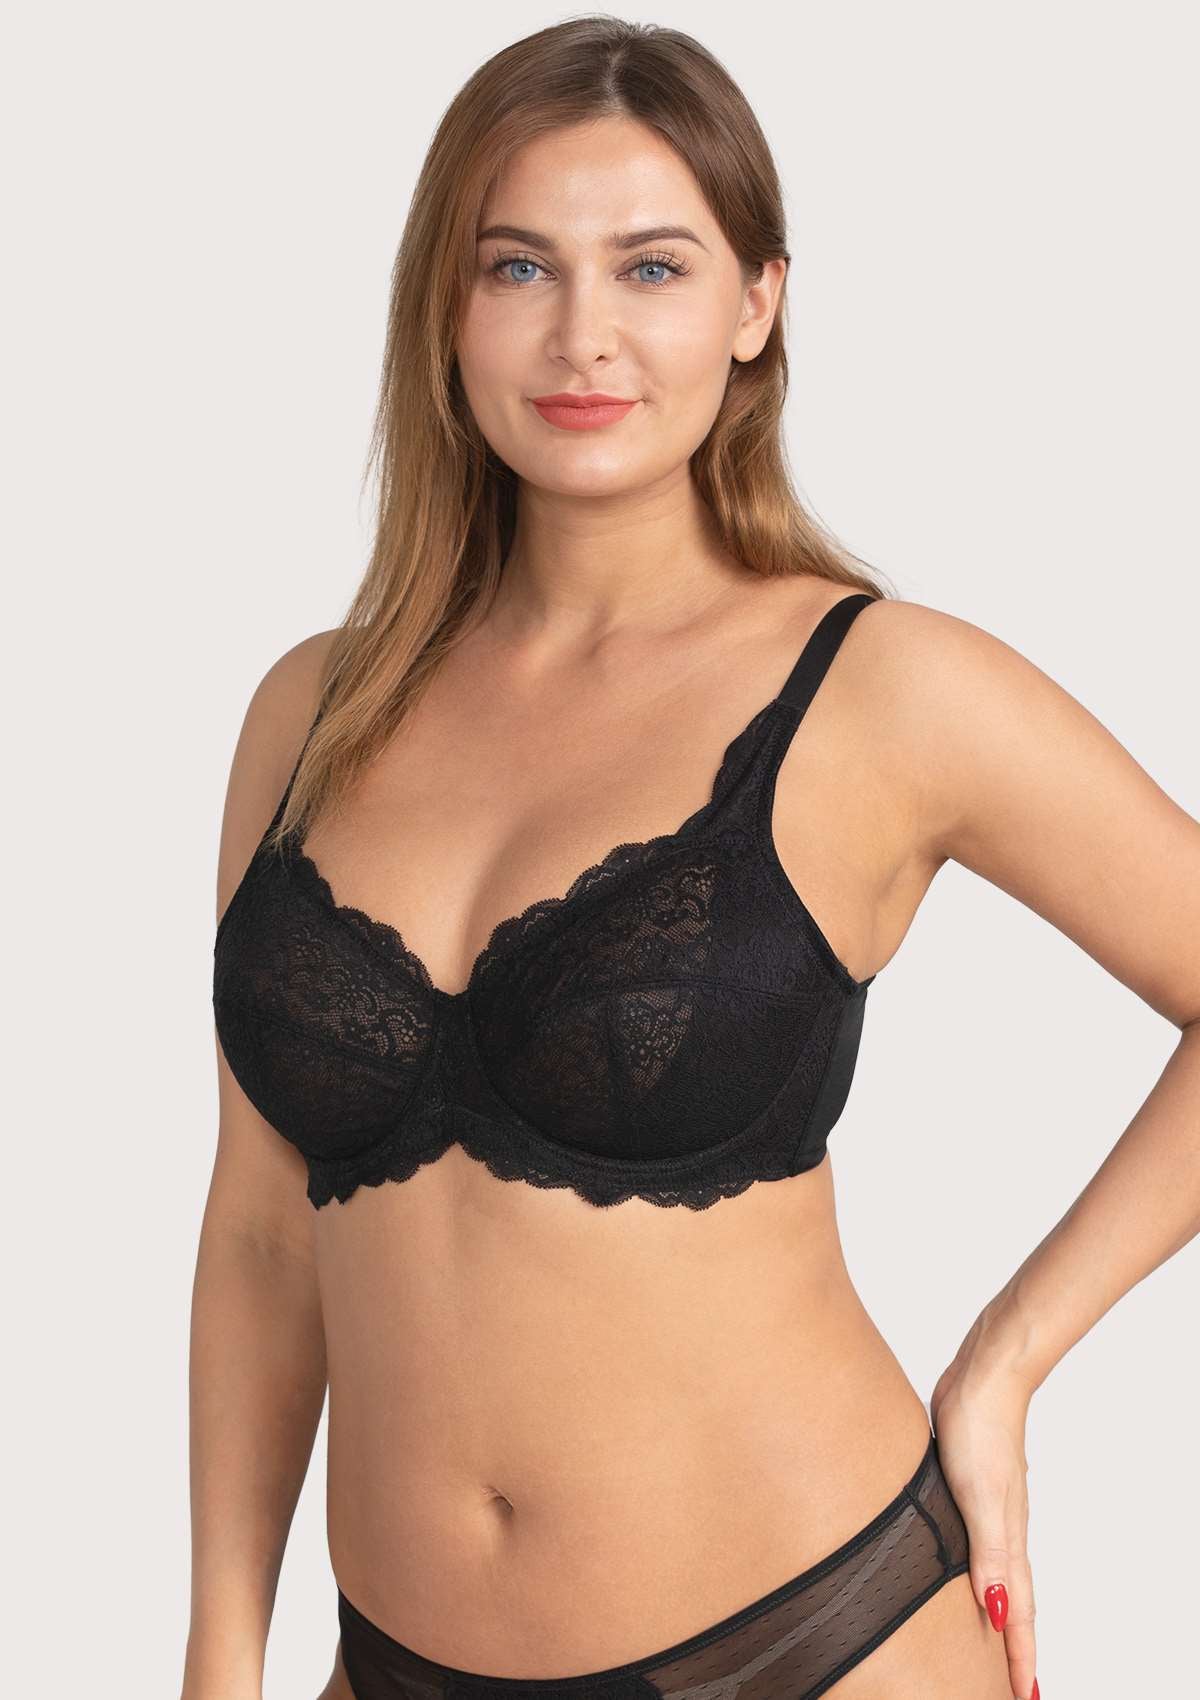 HSIA All-Over Floral Lace Unlined Bra: Minimizer Bra For Heavy Breasts - Black / 42 / D